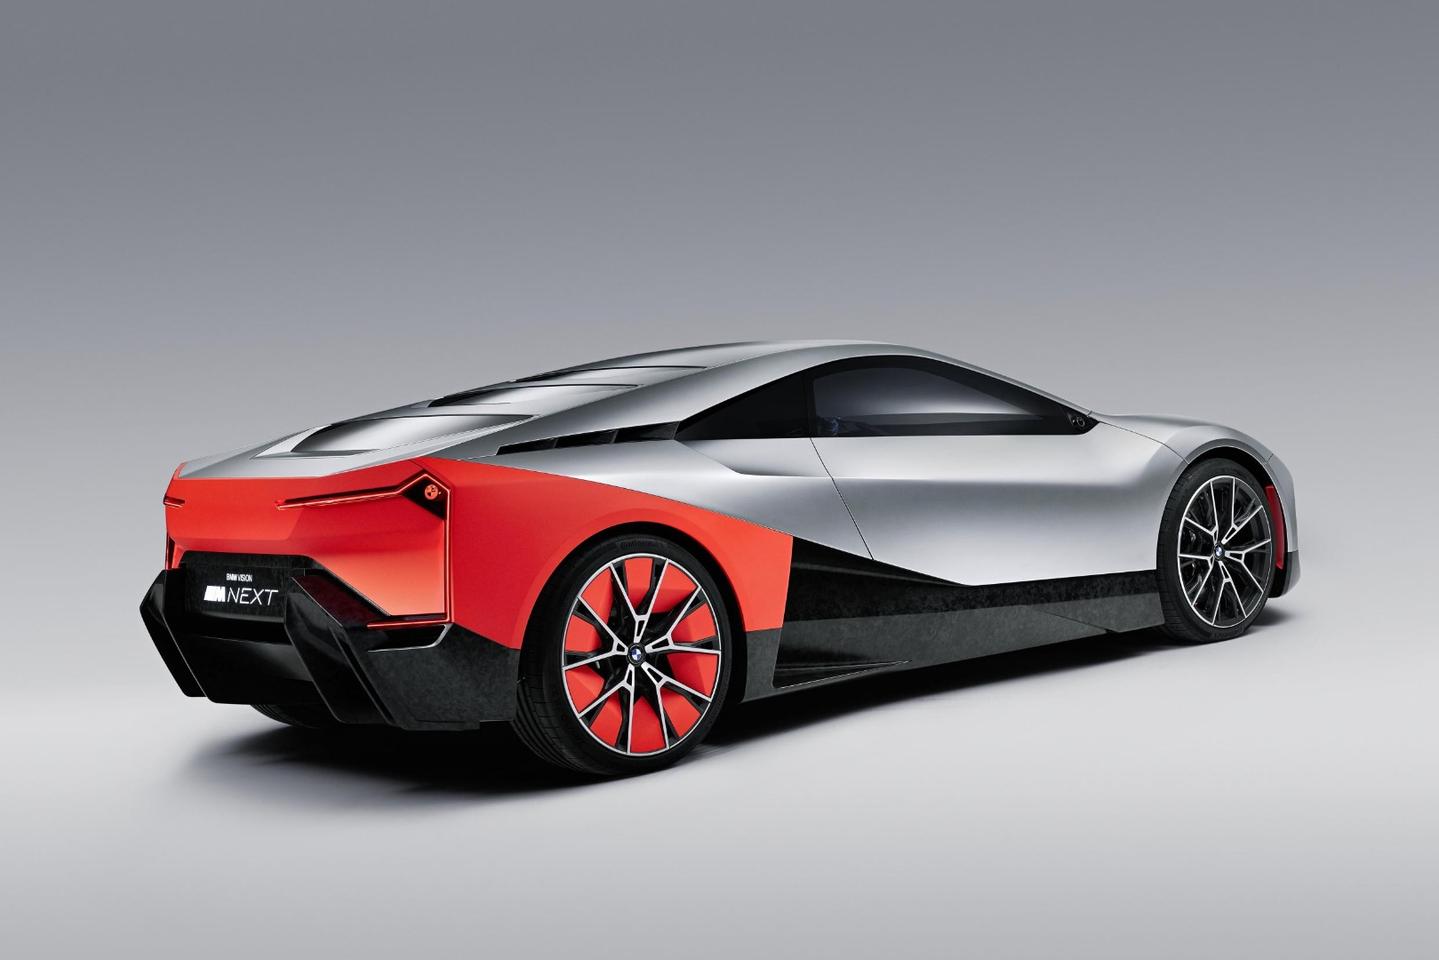 The BMW Vision M Next combines electric and turbo power